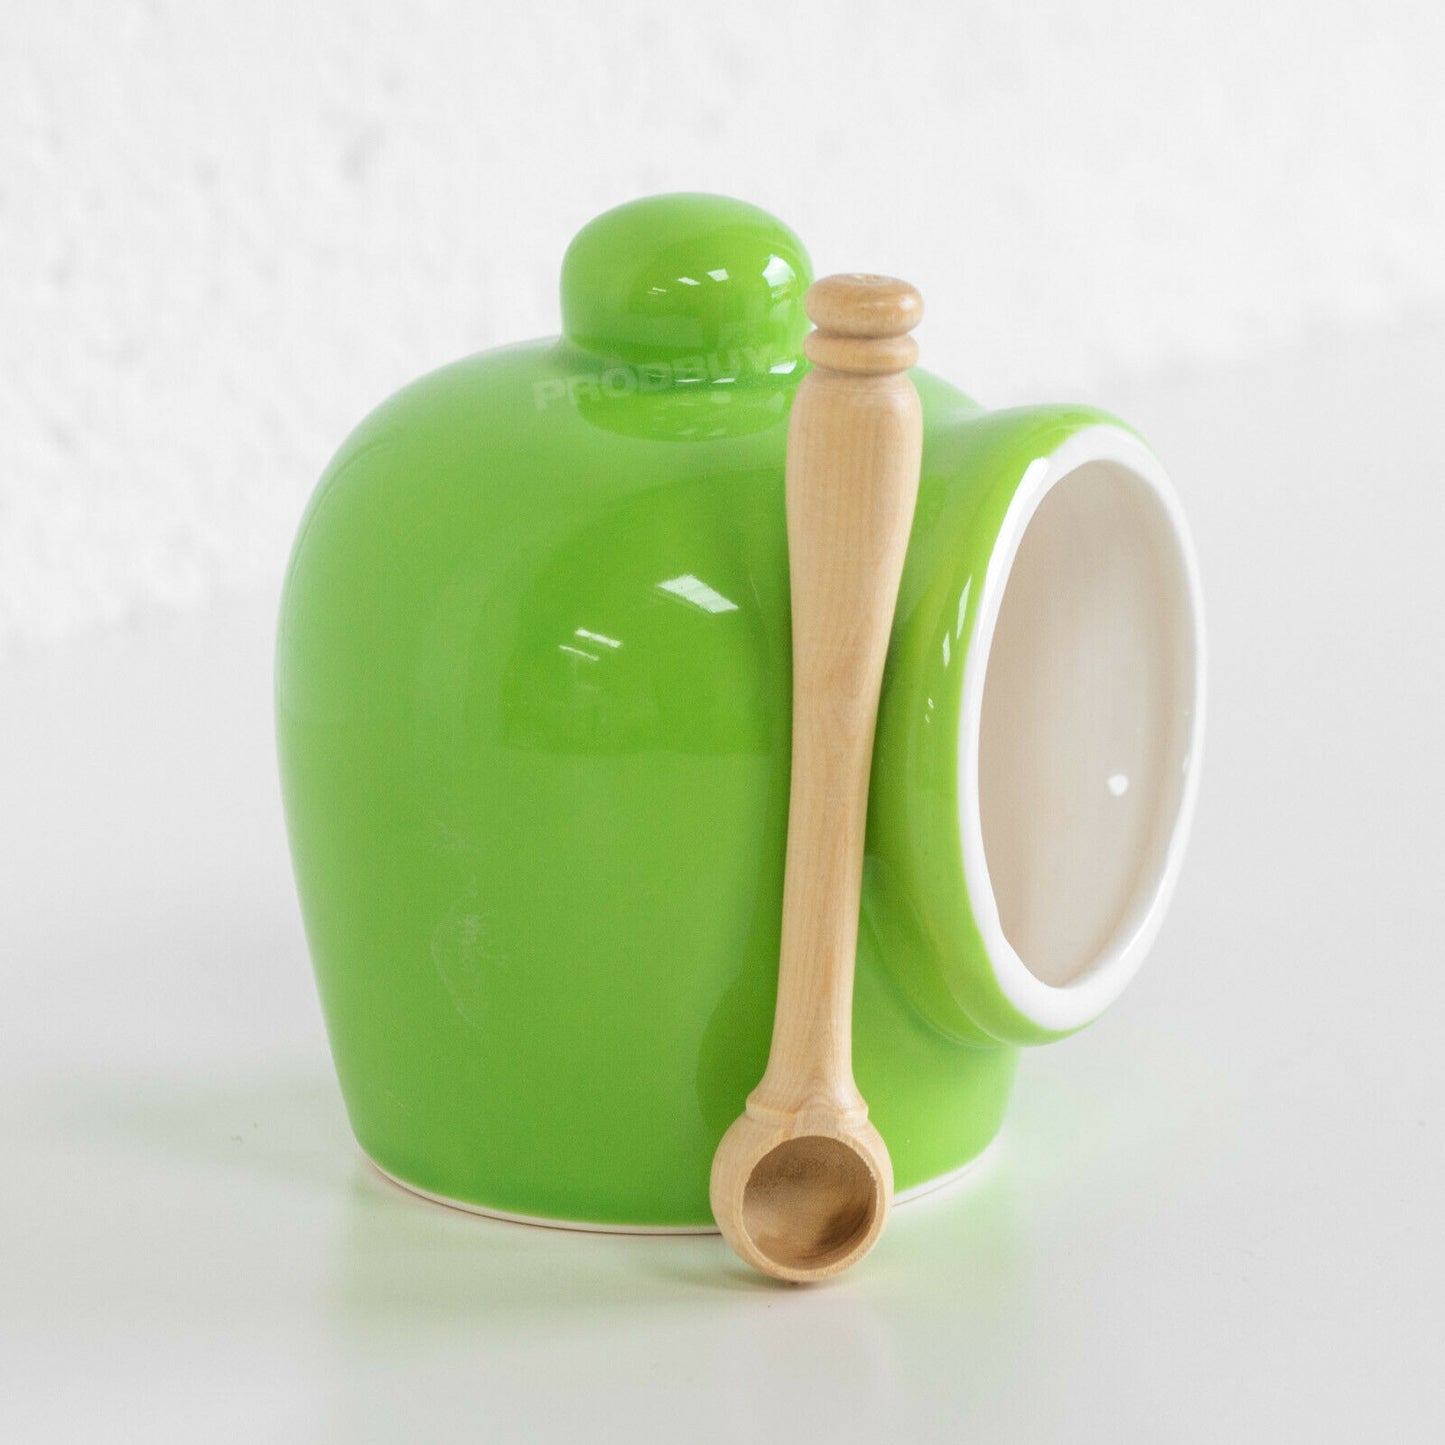 Small Green Salt Pig with Wooden Spoon